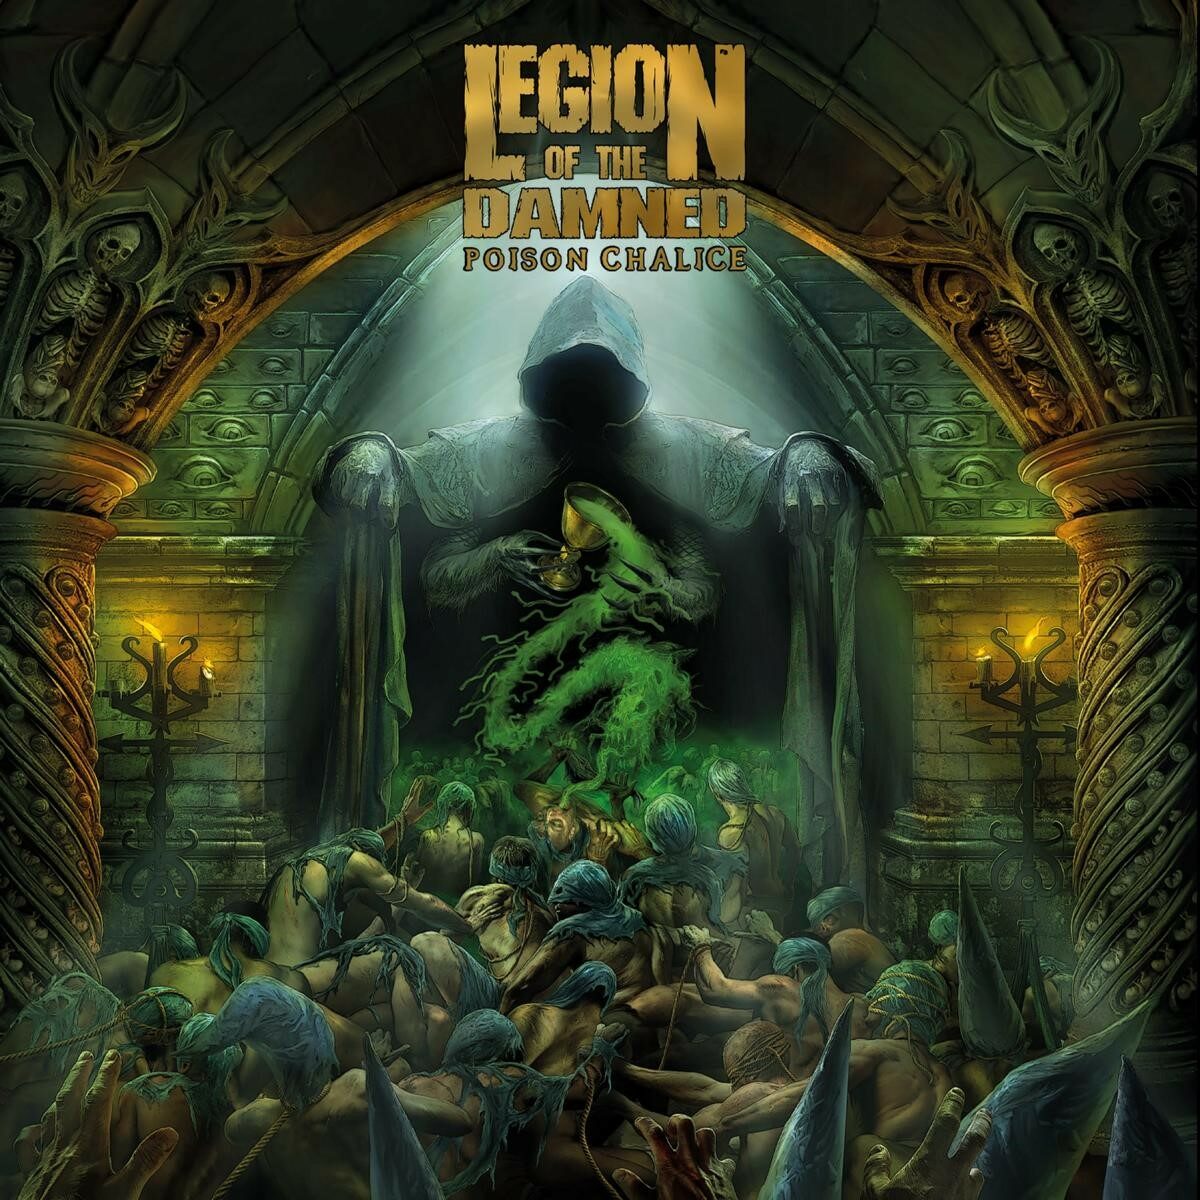 Legion of the Damned The Poison Chalice